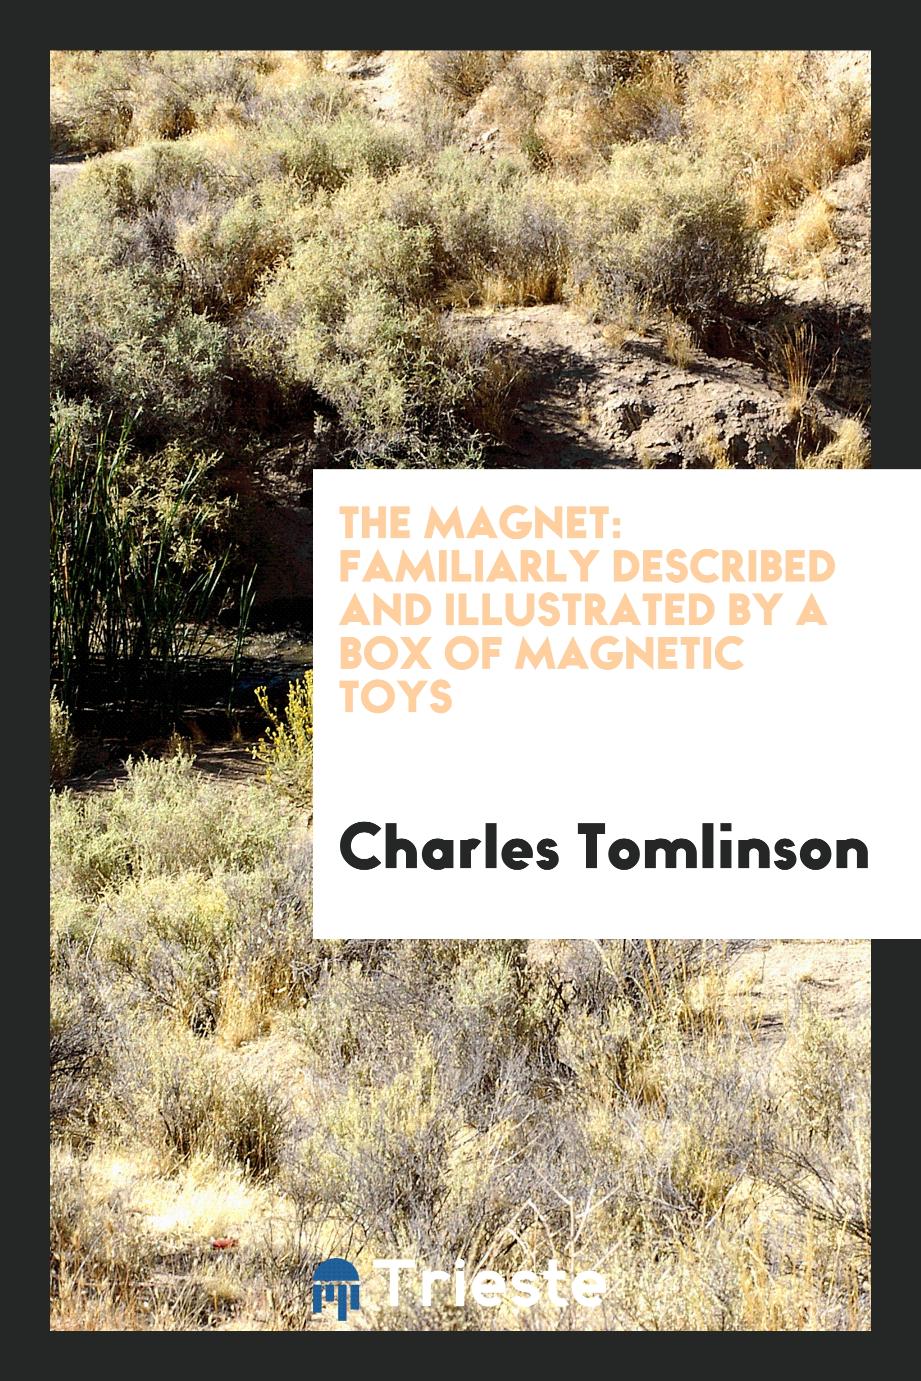 The Magnet: Familiarly Described and Illustrated by a Box of Magnetic Toys